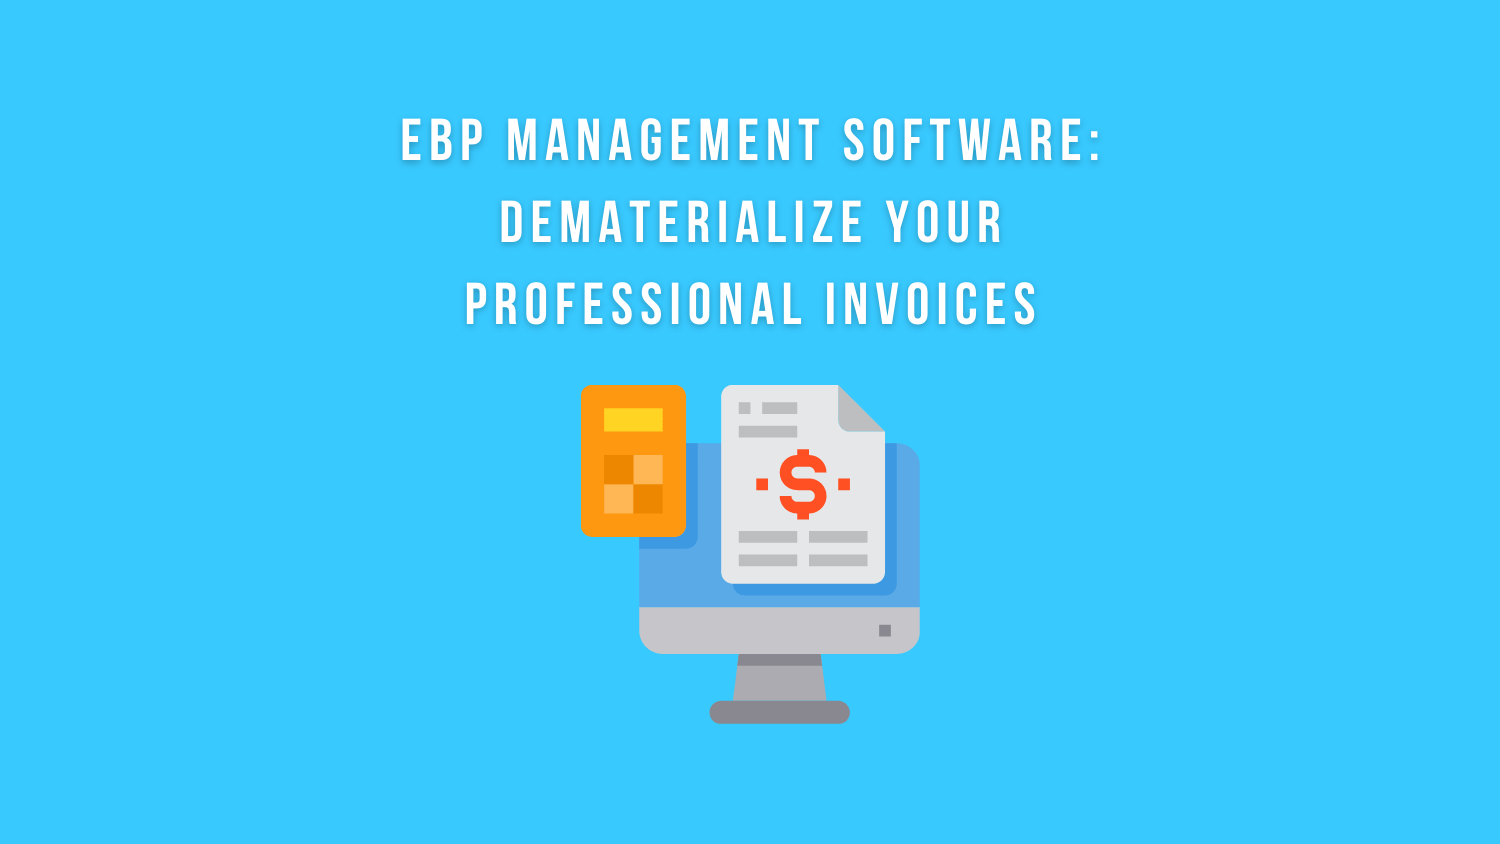 EBP management software: dematerialize your professional invoices Ayruu